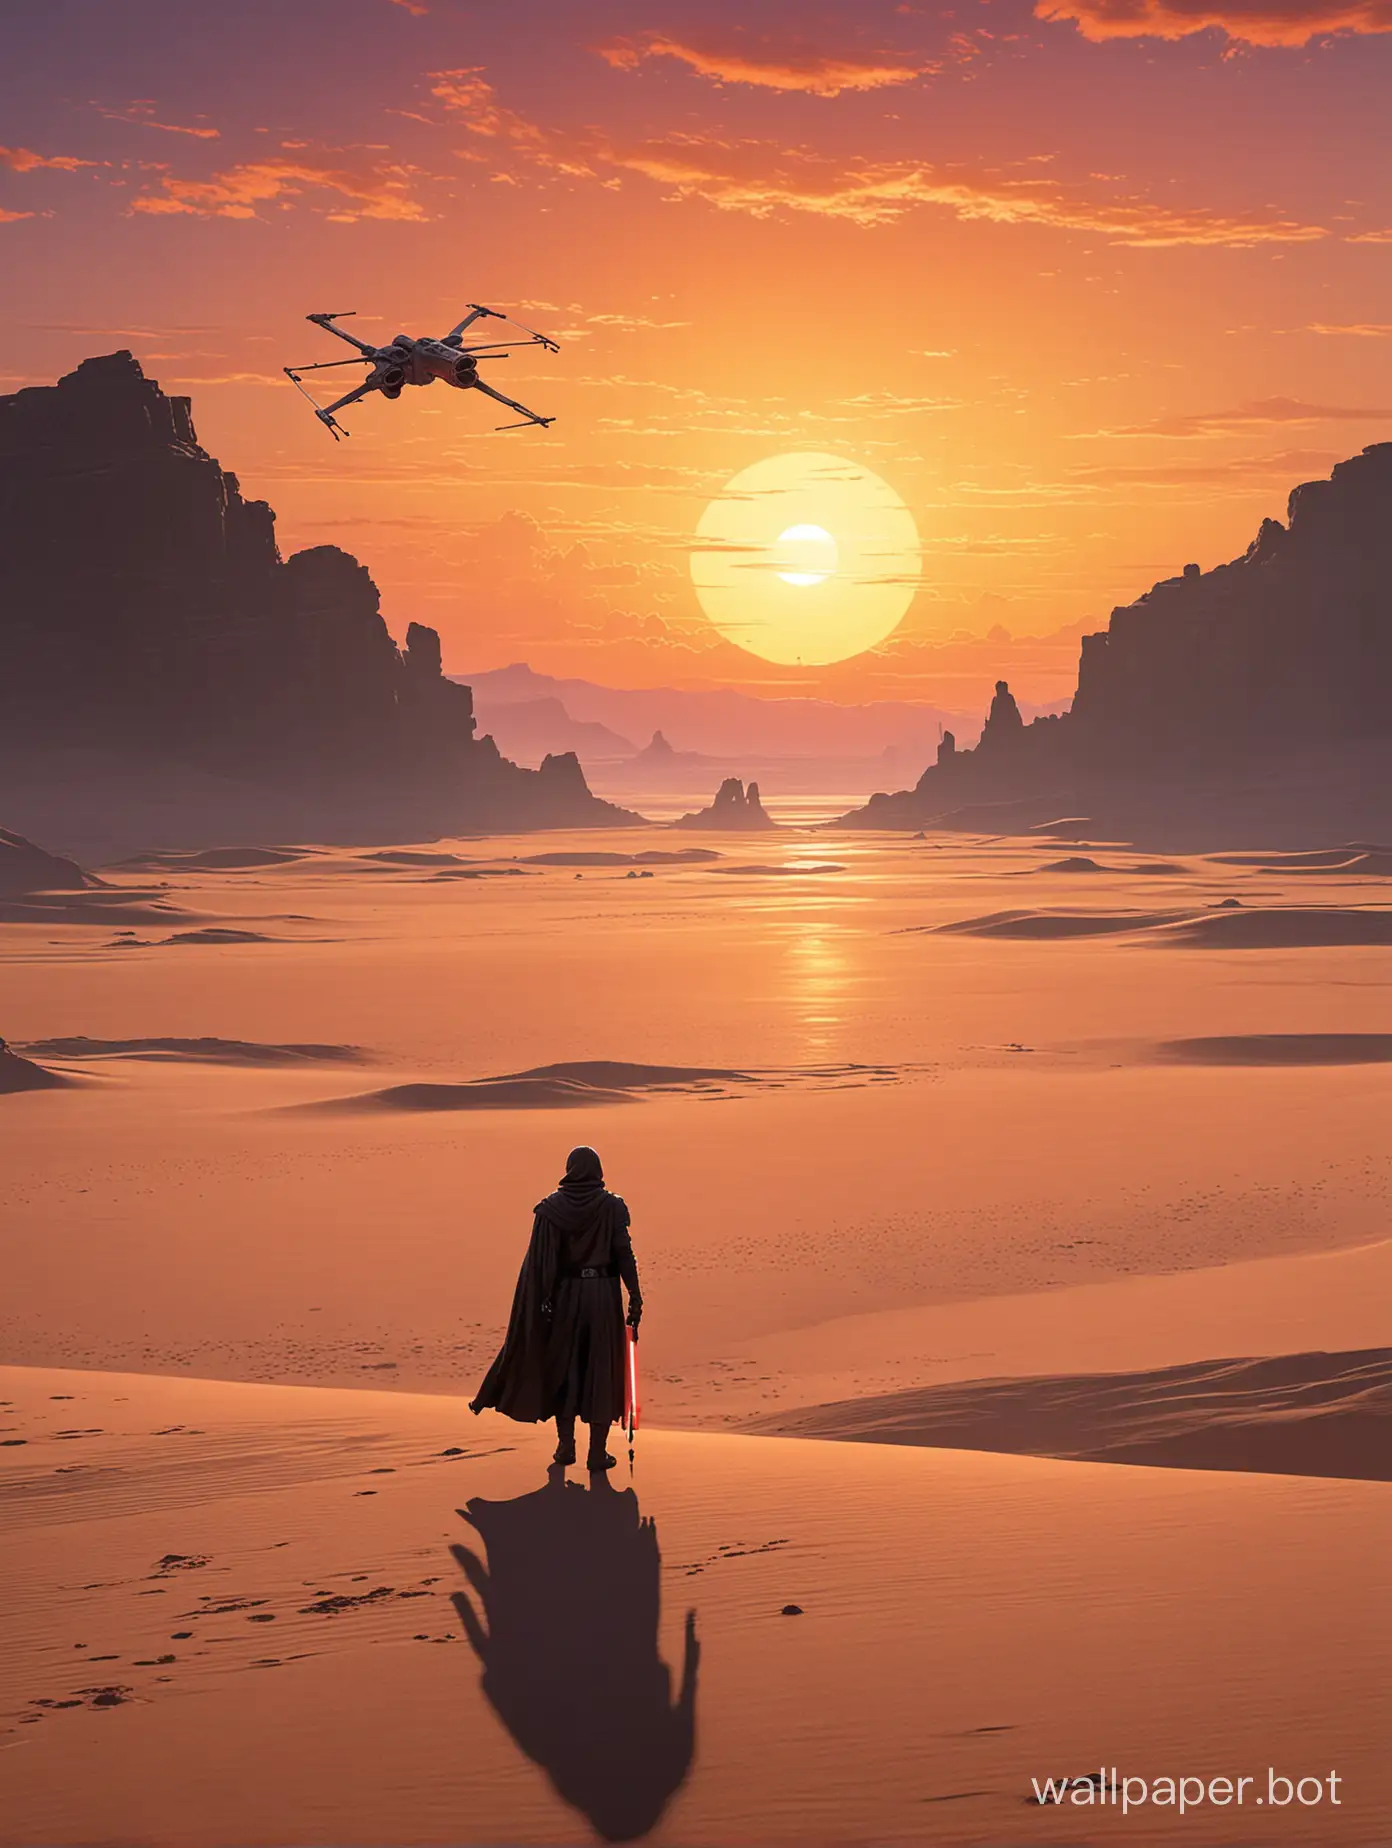 Golden-Sunset-on-Tatooine-Lone-Jedi-and-Xwing-Silhouette